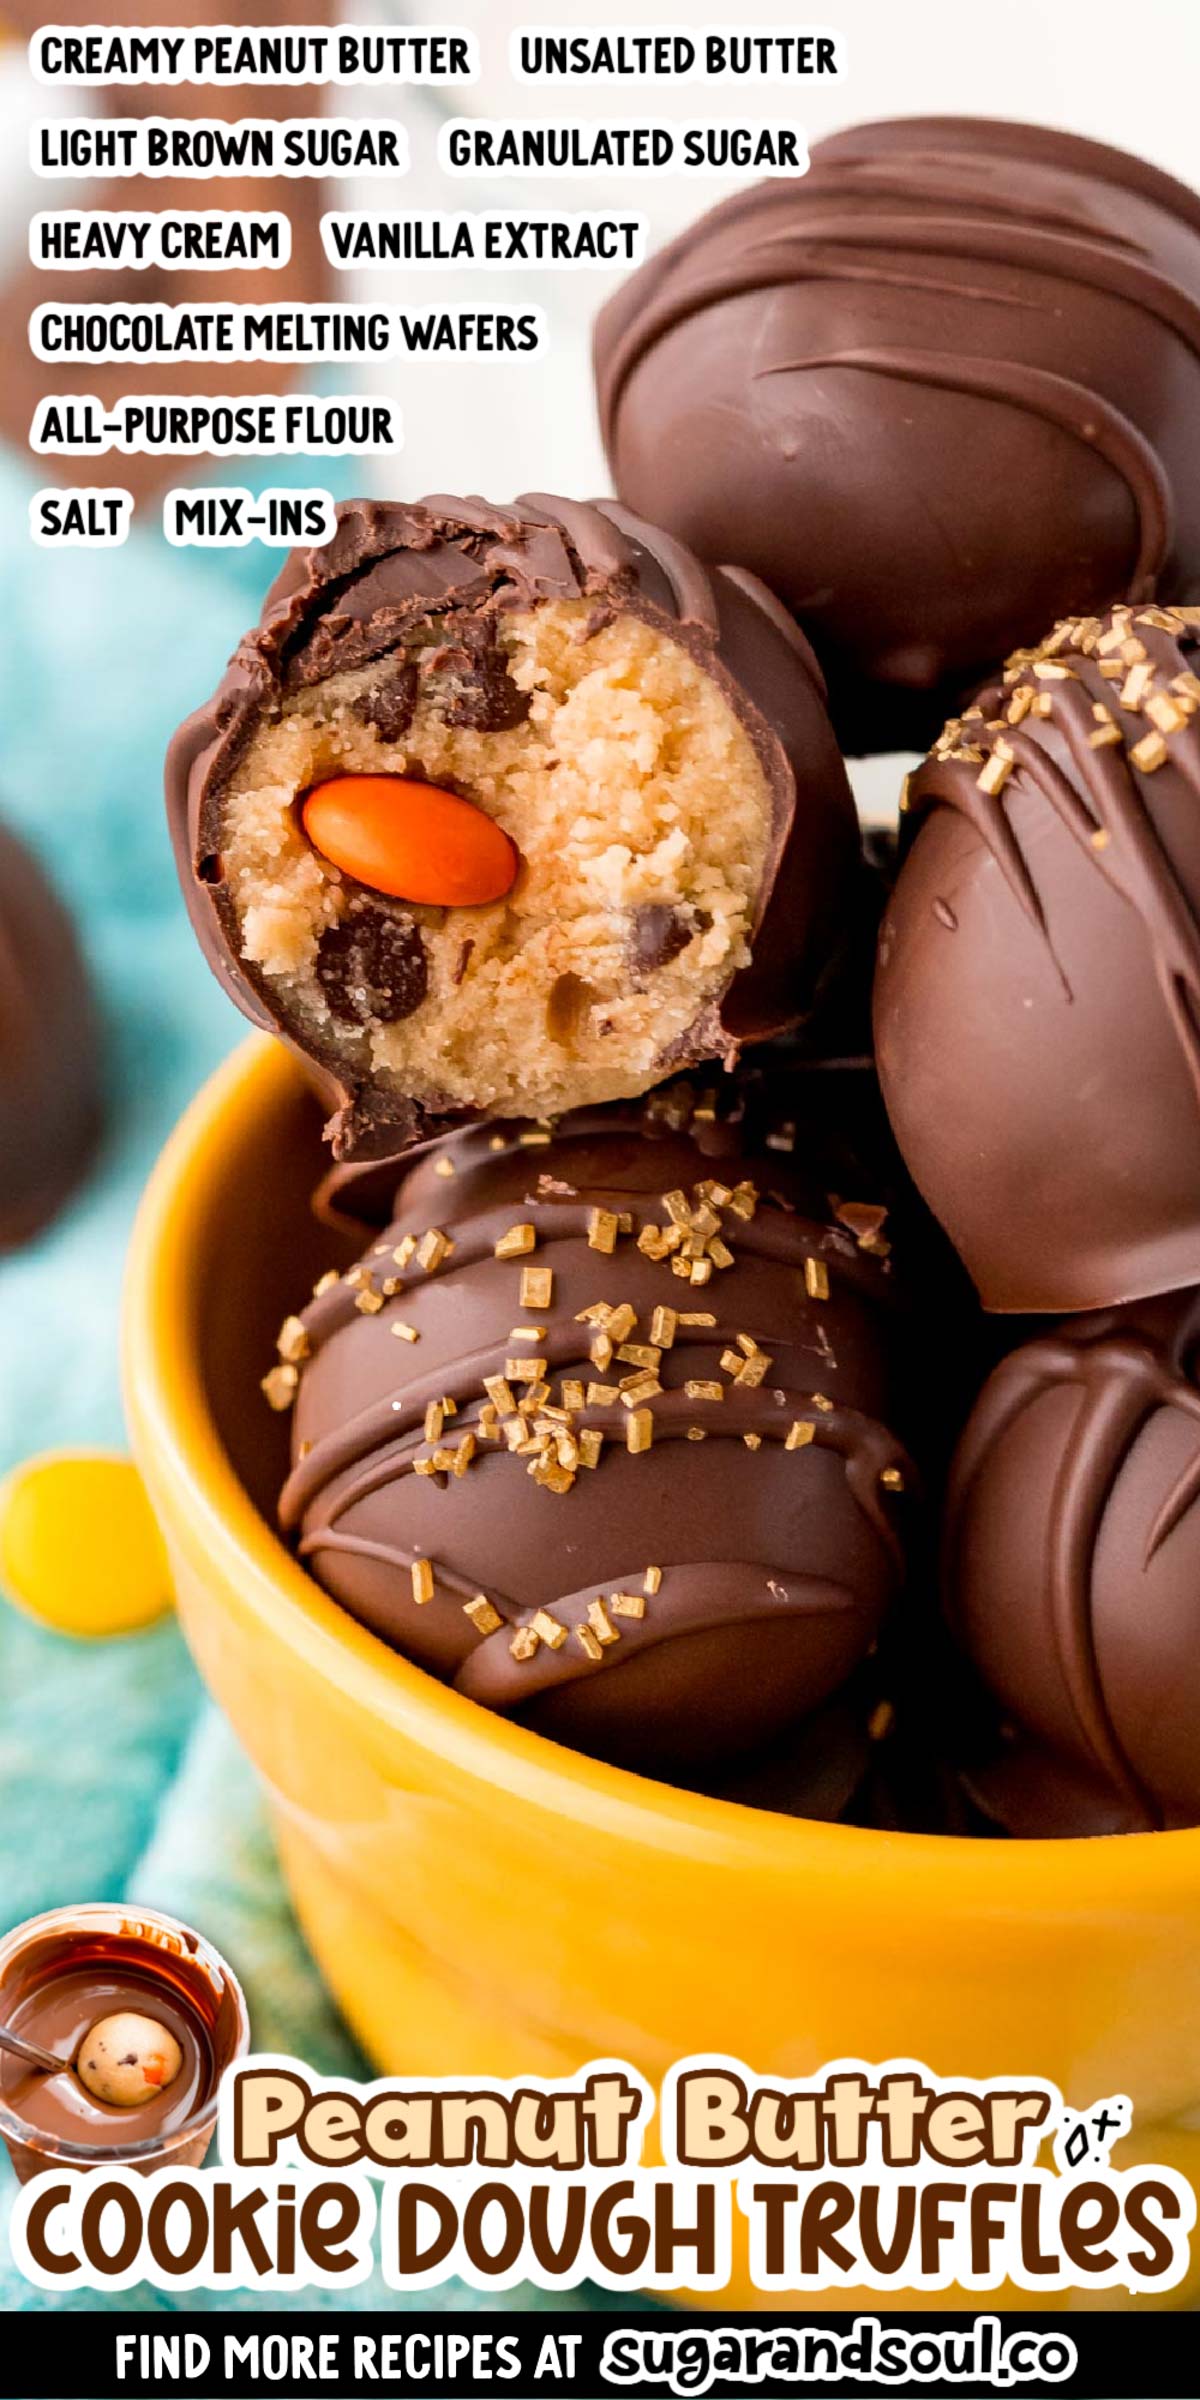 Peanut Butter Cookie Dough Truffles are a no-bake bite-sized dessert with a sweet and salty cookie dough center that's wrapped in chocolate! Takes less than 1 hour to whip up a batch! via @sugarandsoulco